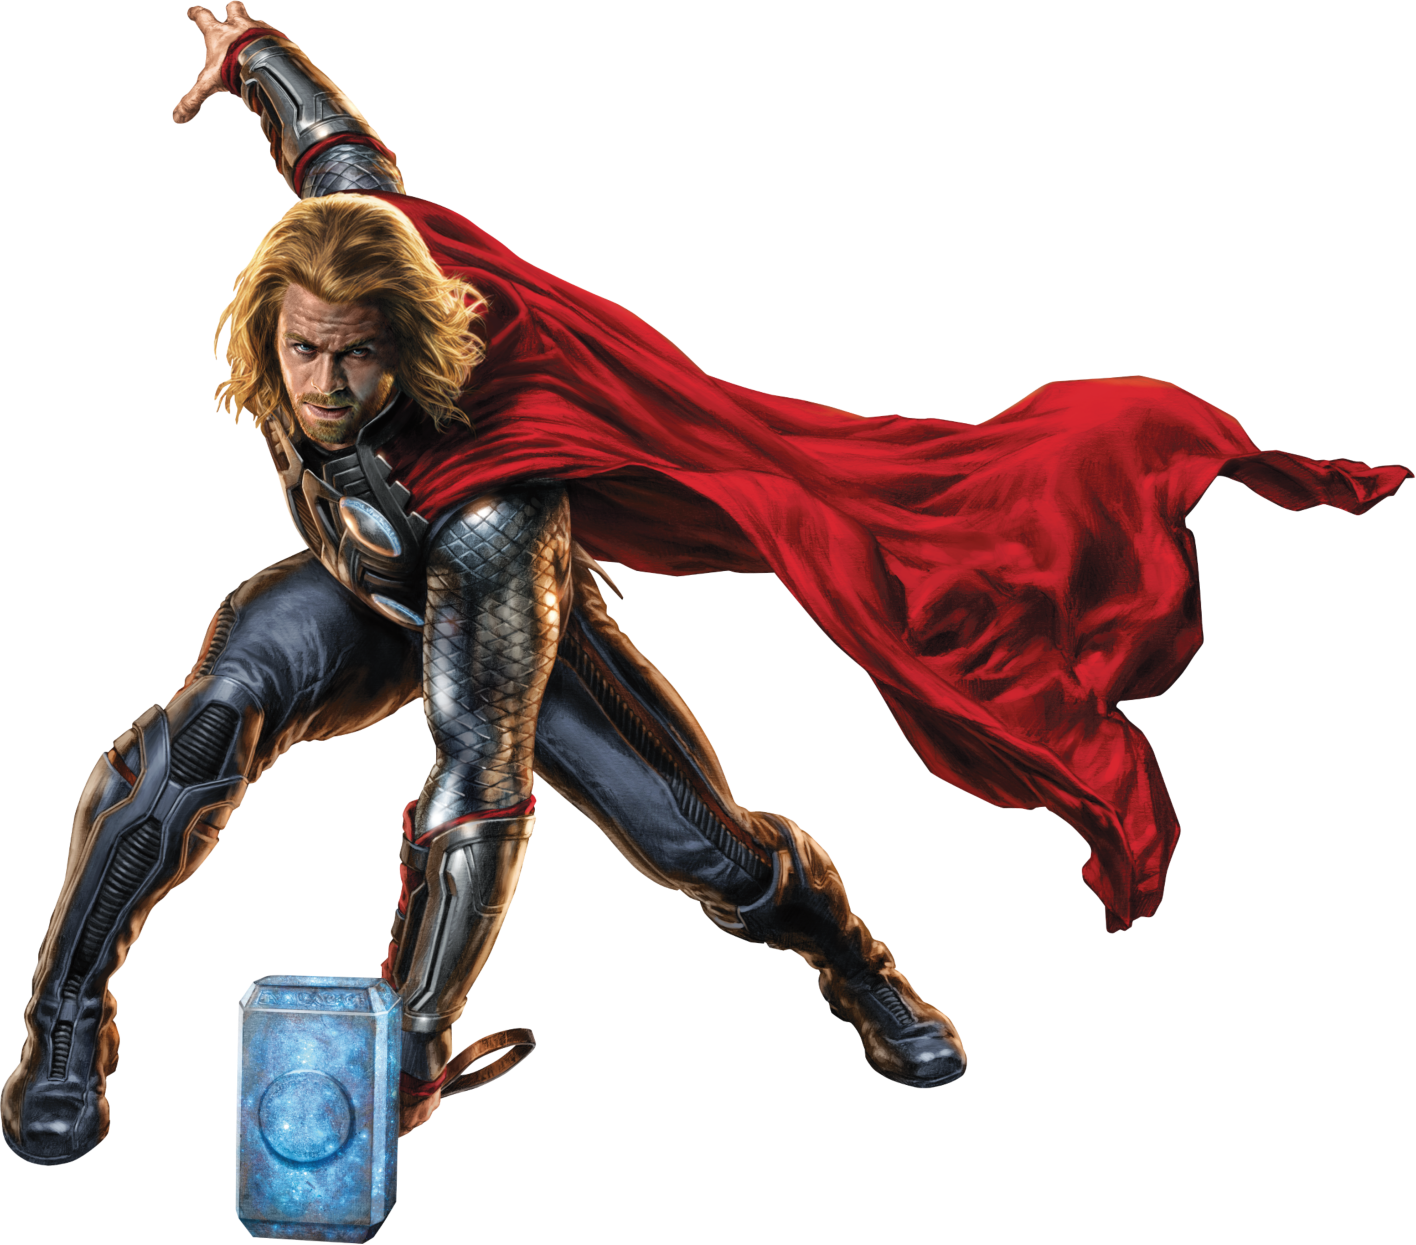 Image   Thor 2 Avengers Fh.png | Marvel Cinematic Universe Wiki | Fandom Powered By Wikia - Thor, Transparent background PNG HD thumbnail